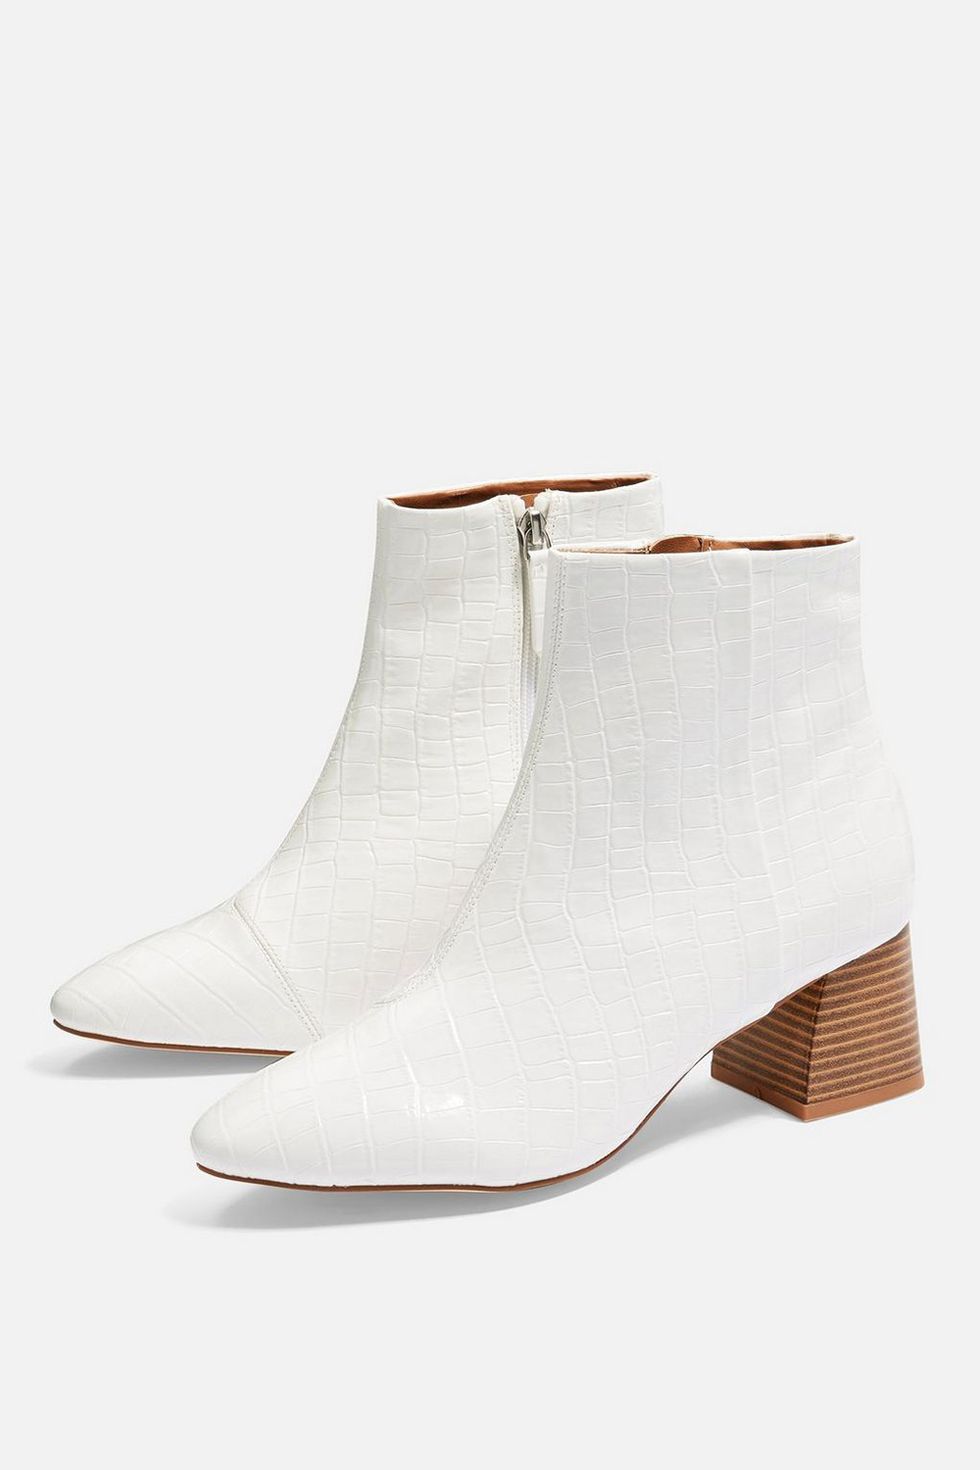 Footwear, White, Shoe, Beige, Boot, Joint, Leather, Wedge, 